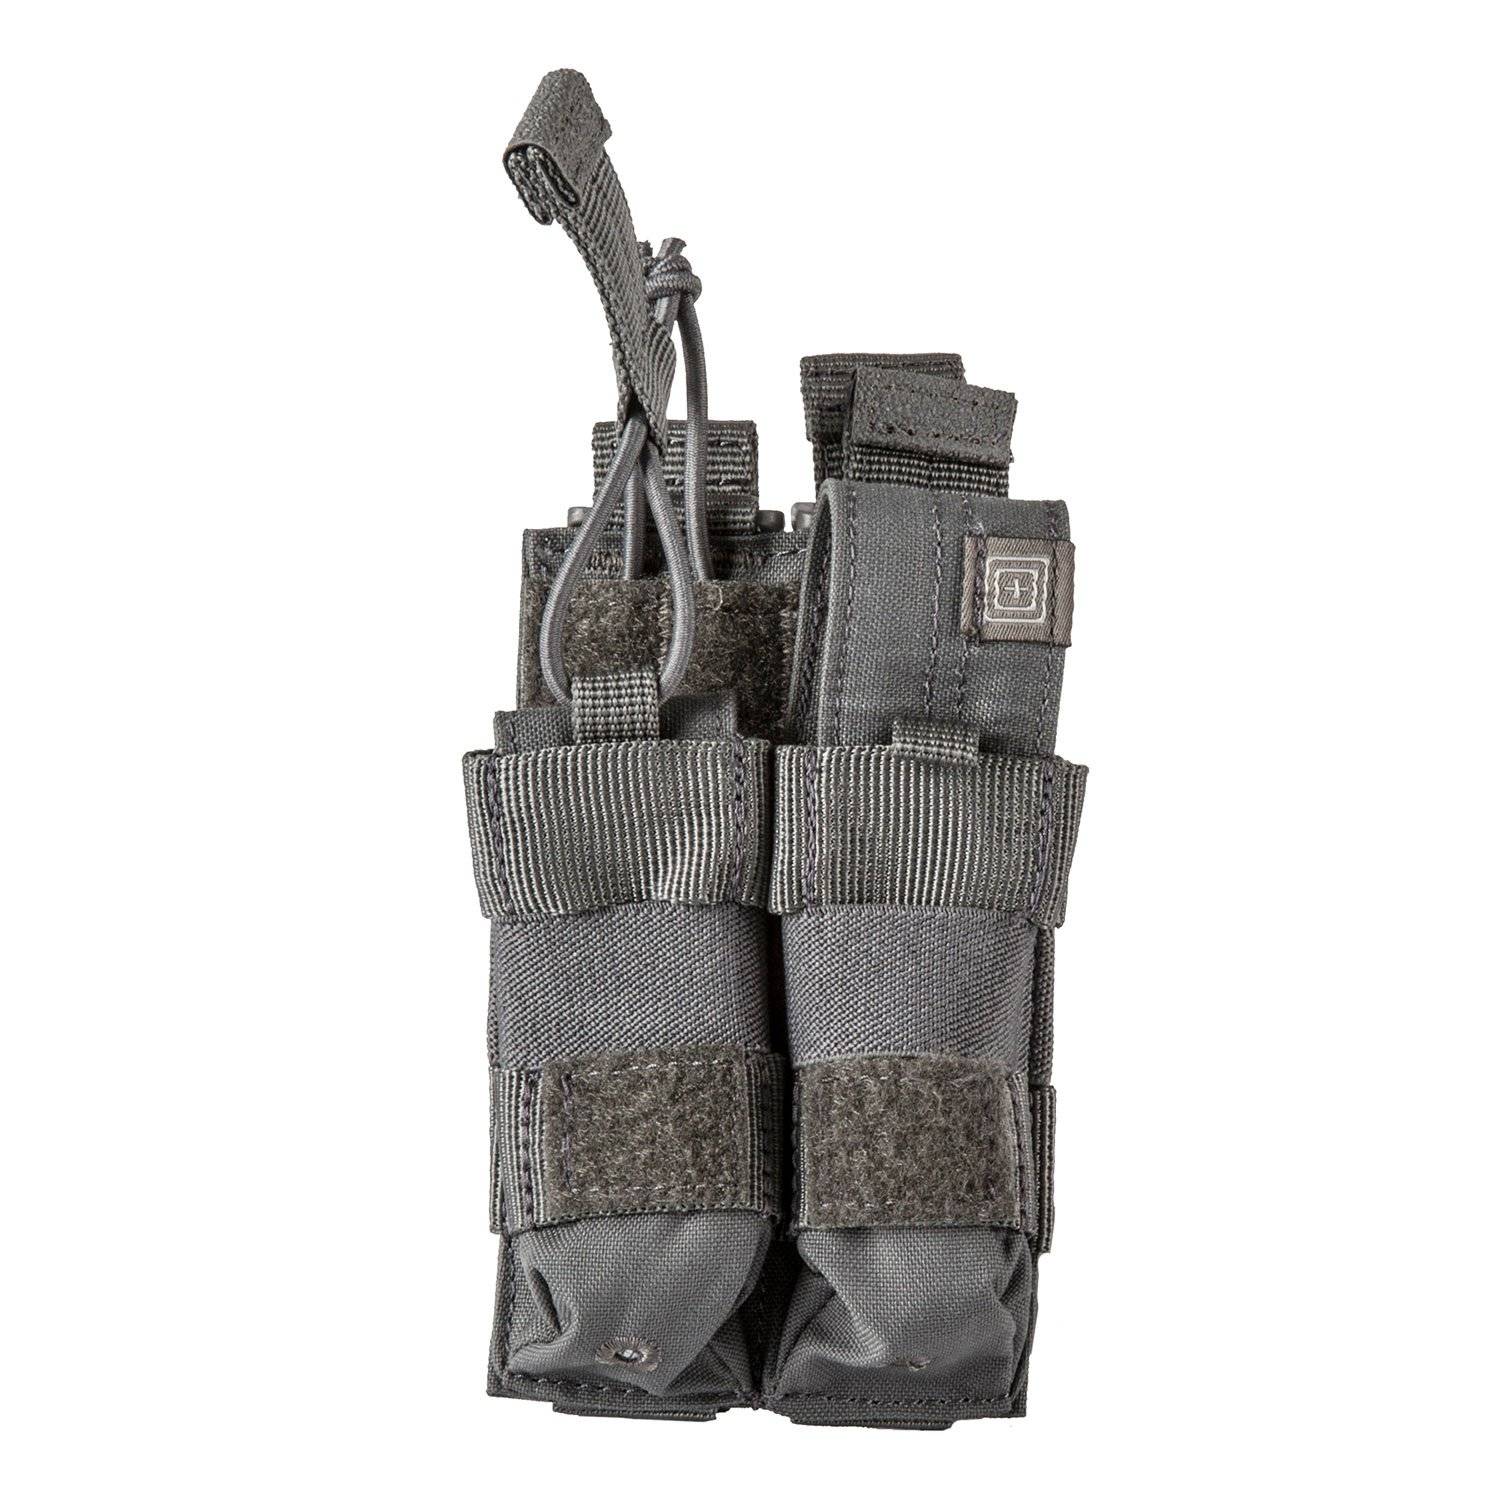 5.11 Tactical Double Pistol Bungee Cover